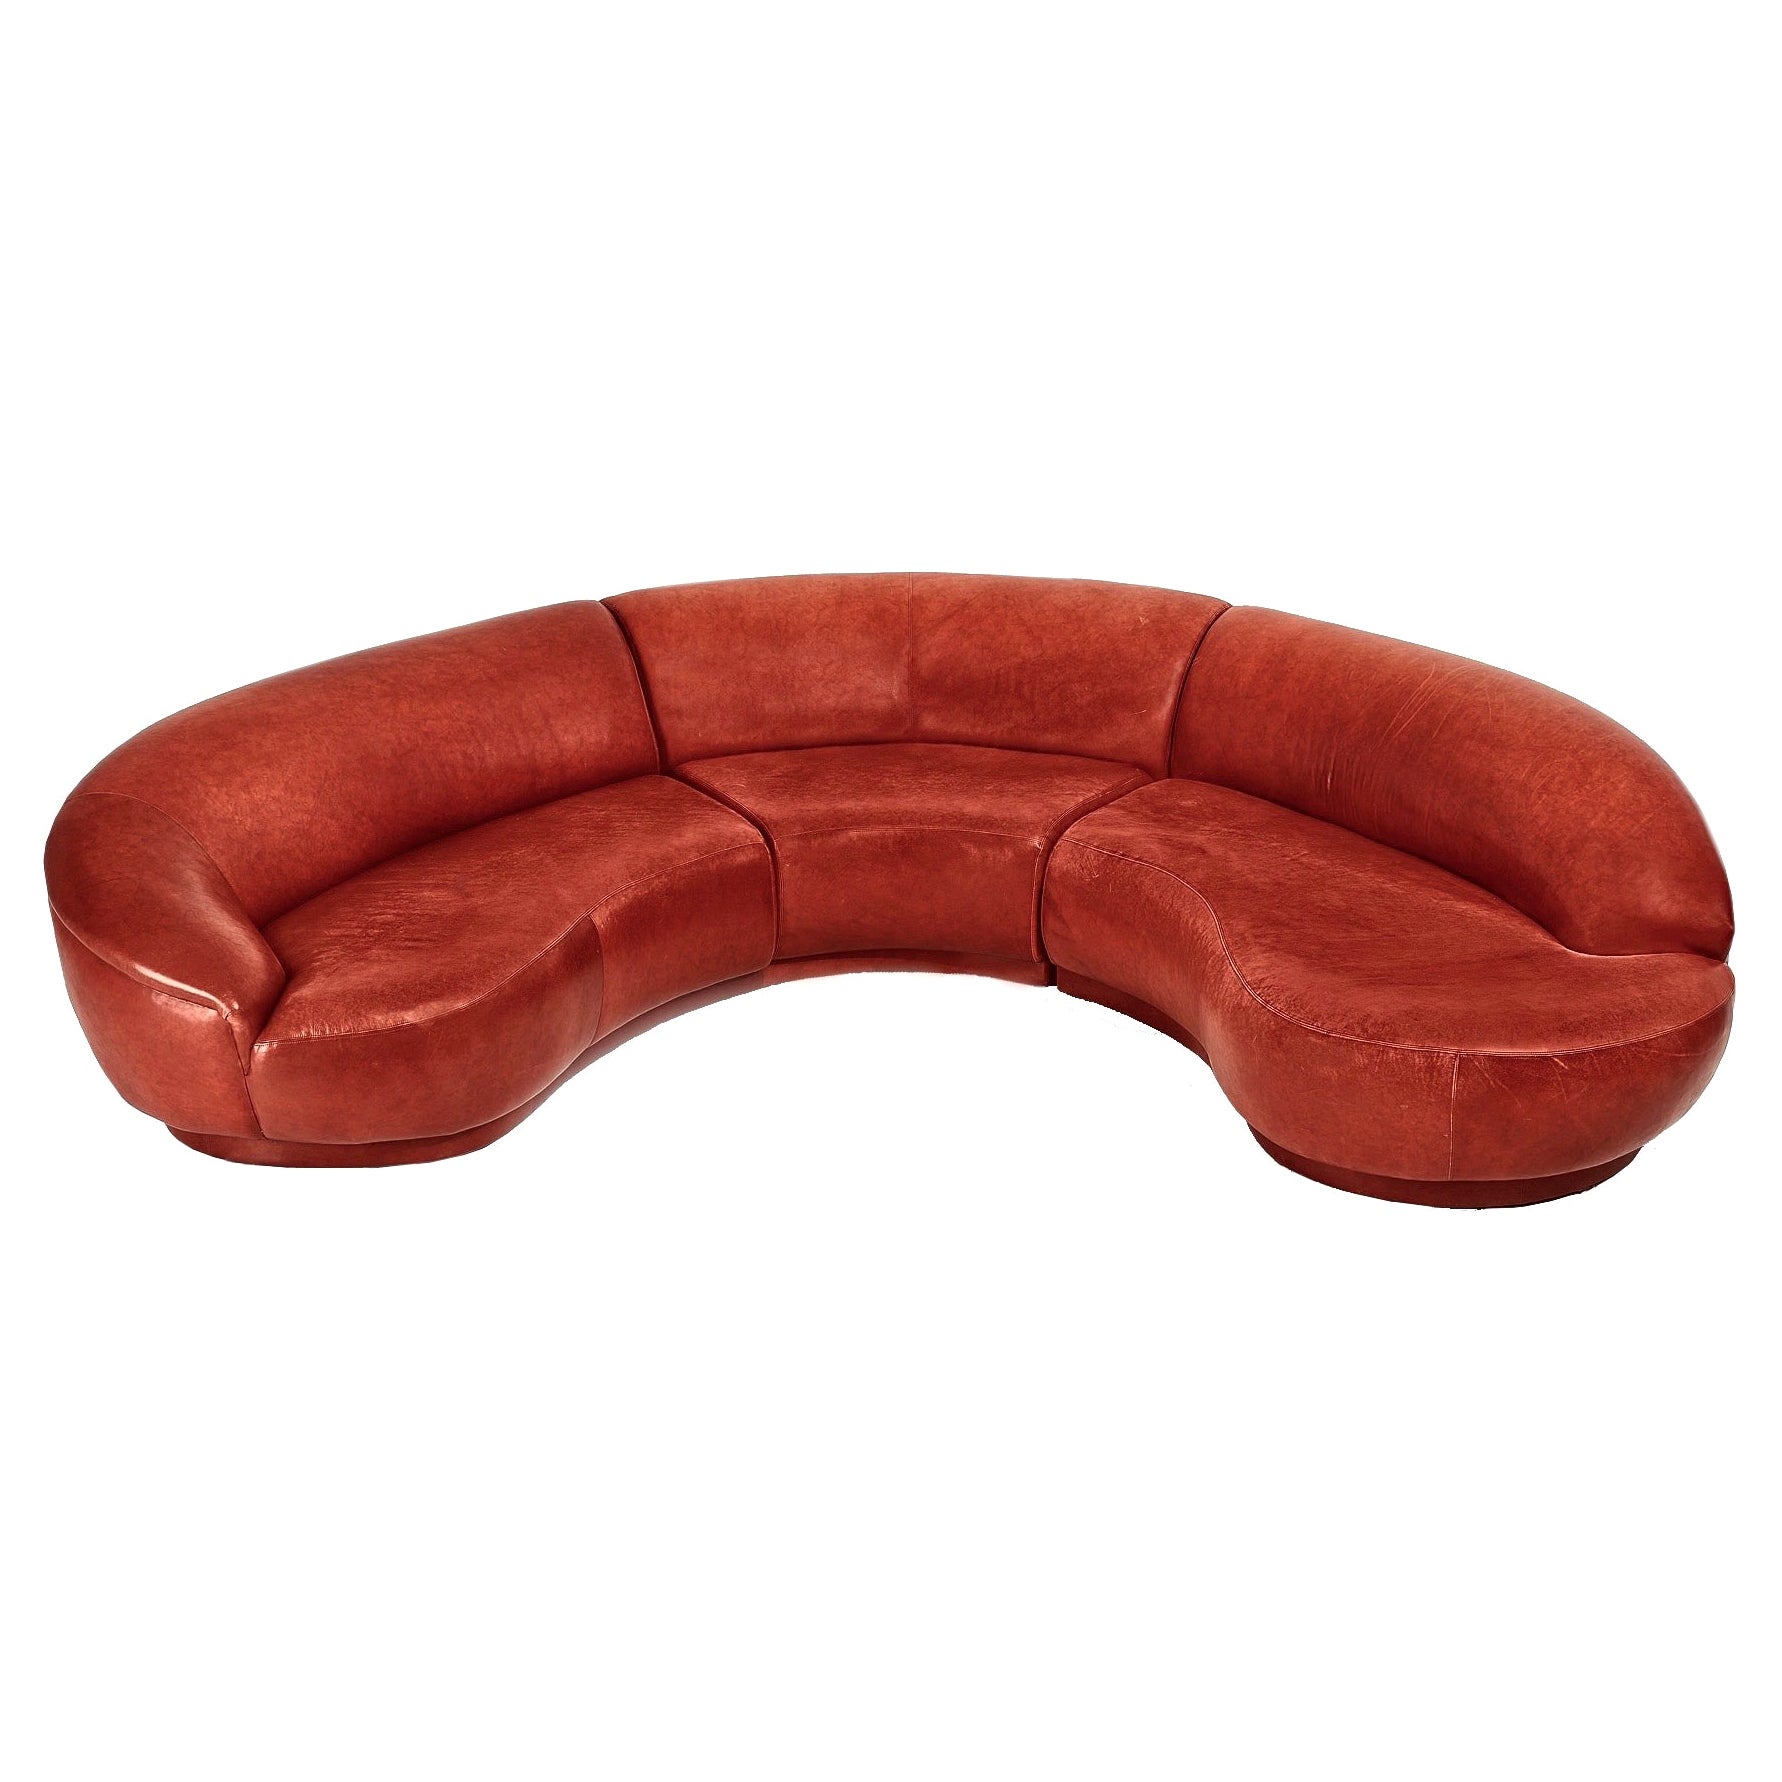 Thayer Coggin Red Leather Sectional Sofa, 1990